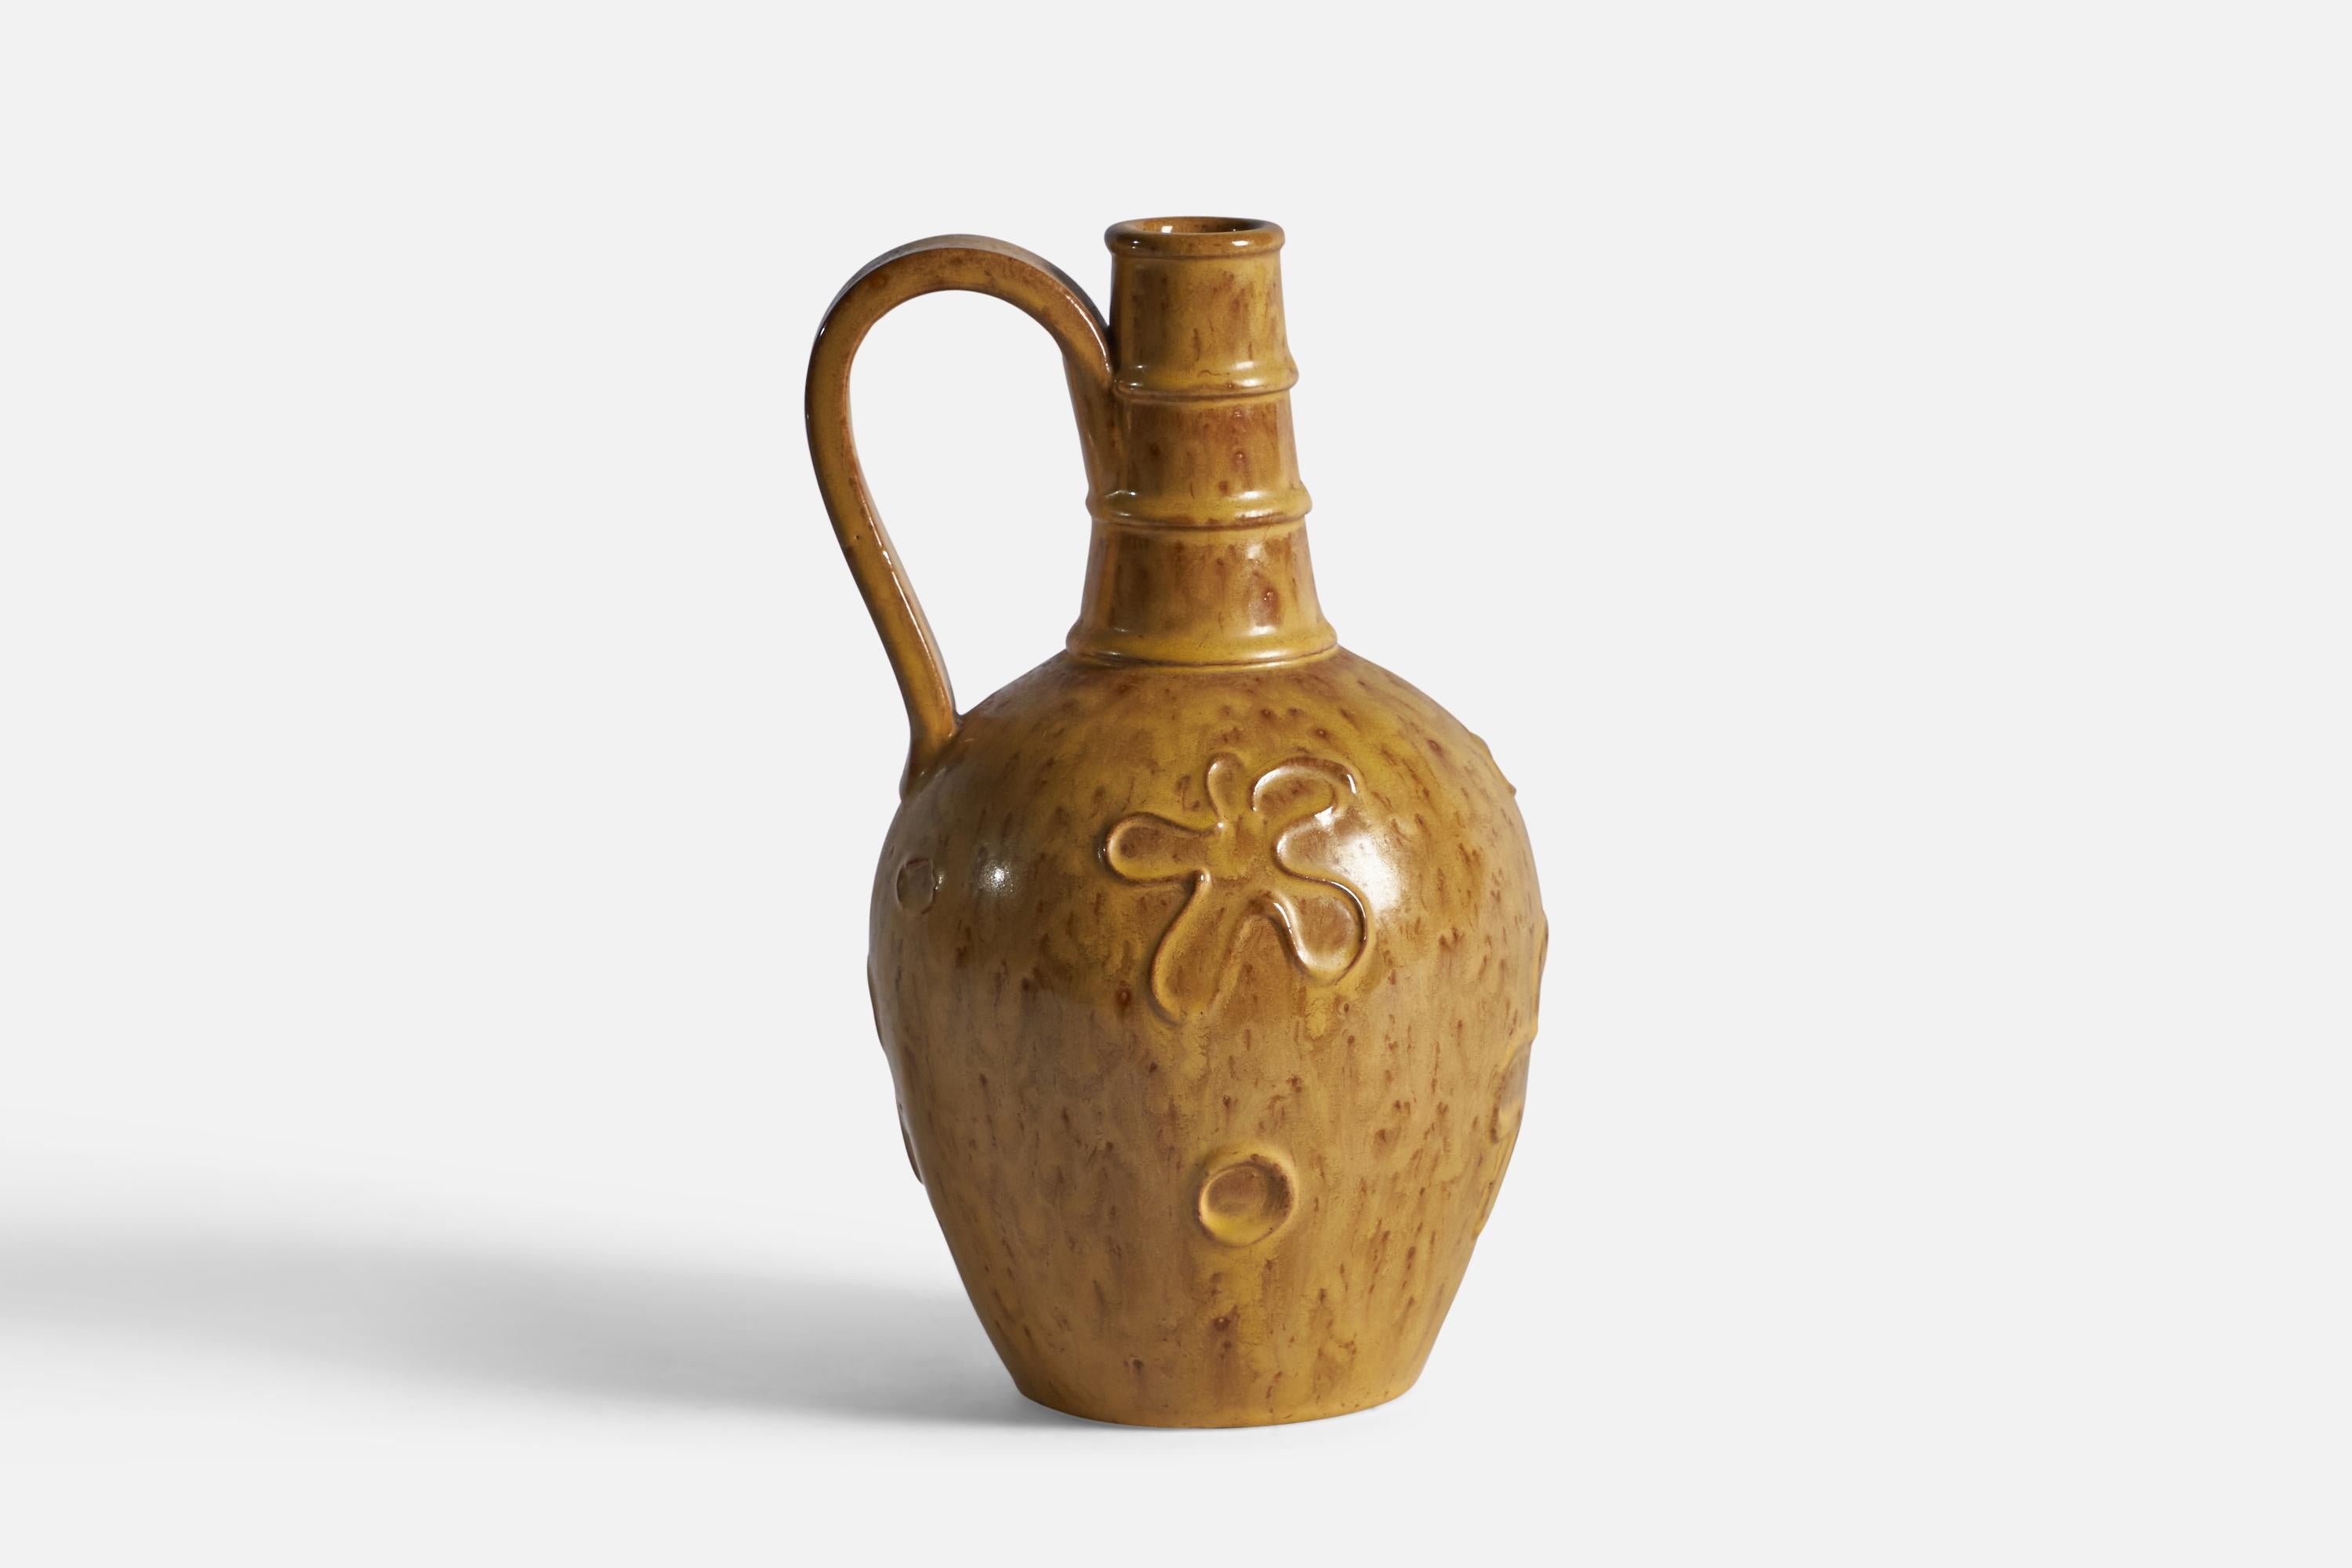 A yellow-glazed earthenware vase with relief decor, designed and produced by Nittsjö, c. 1940s.